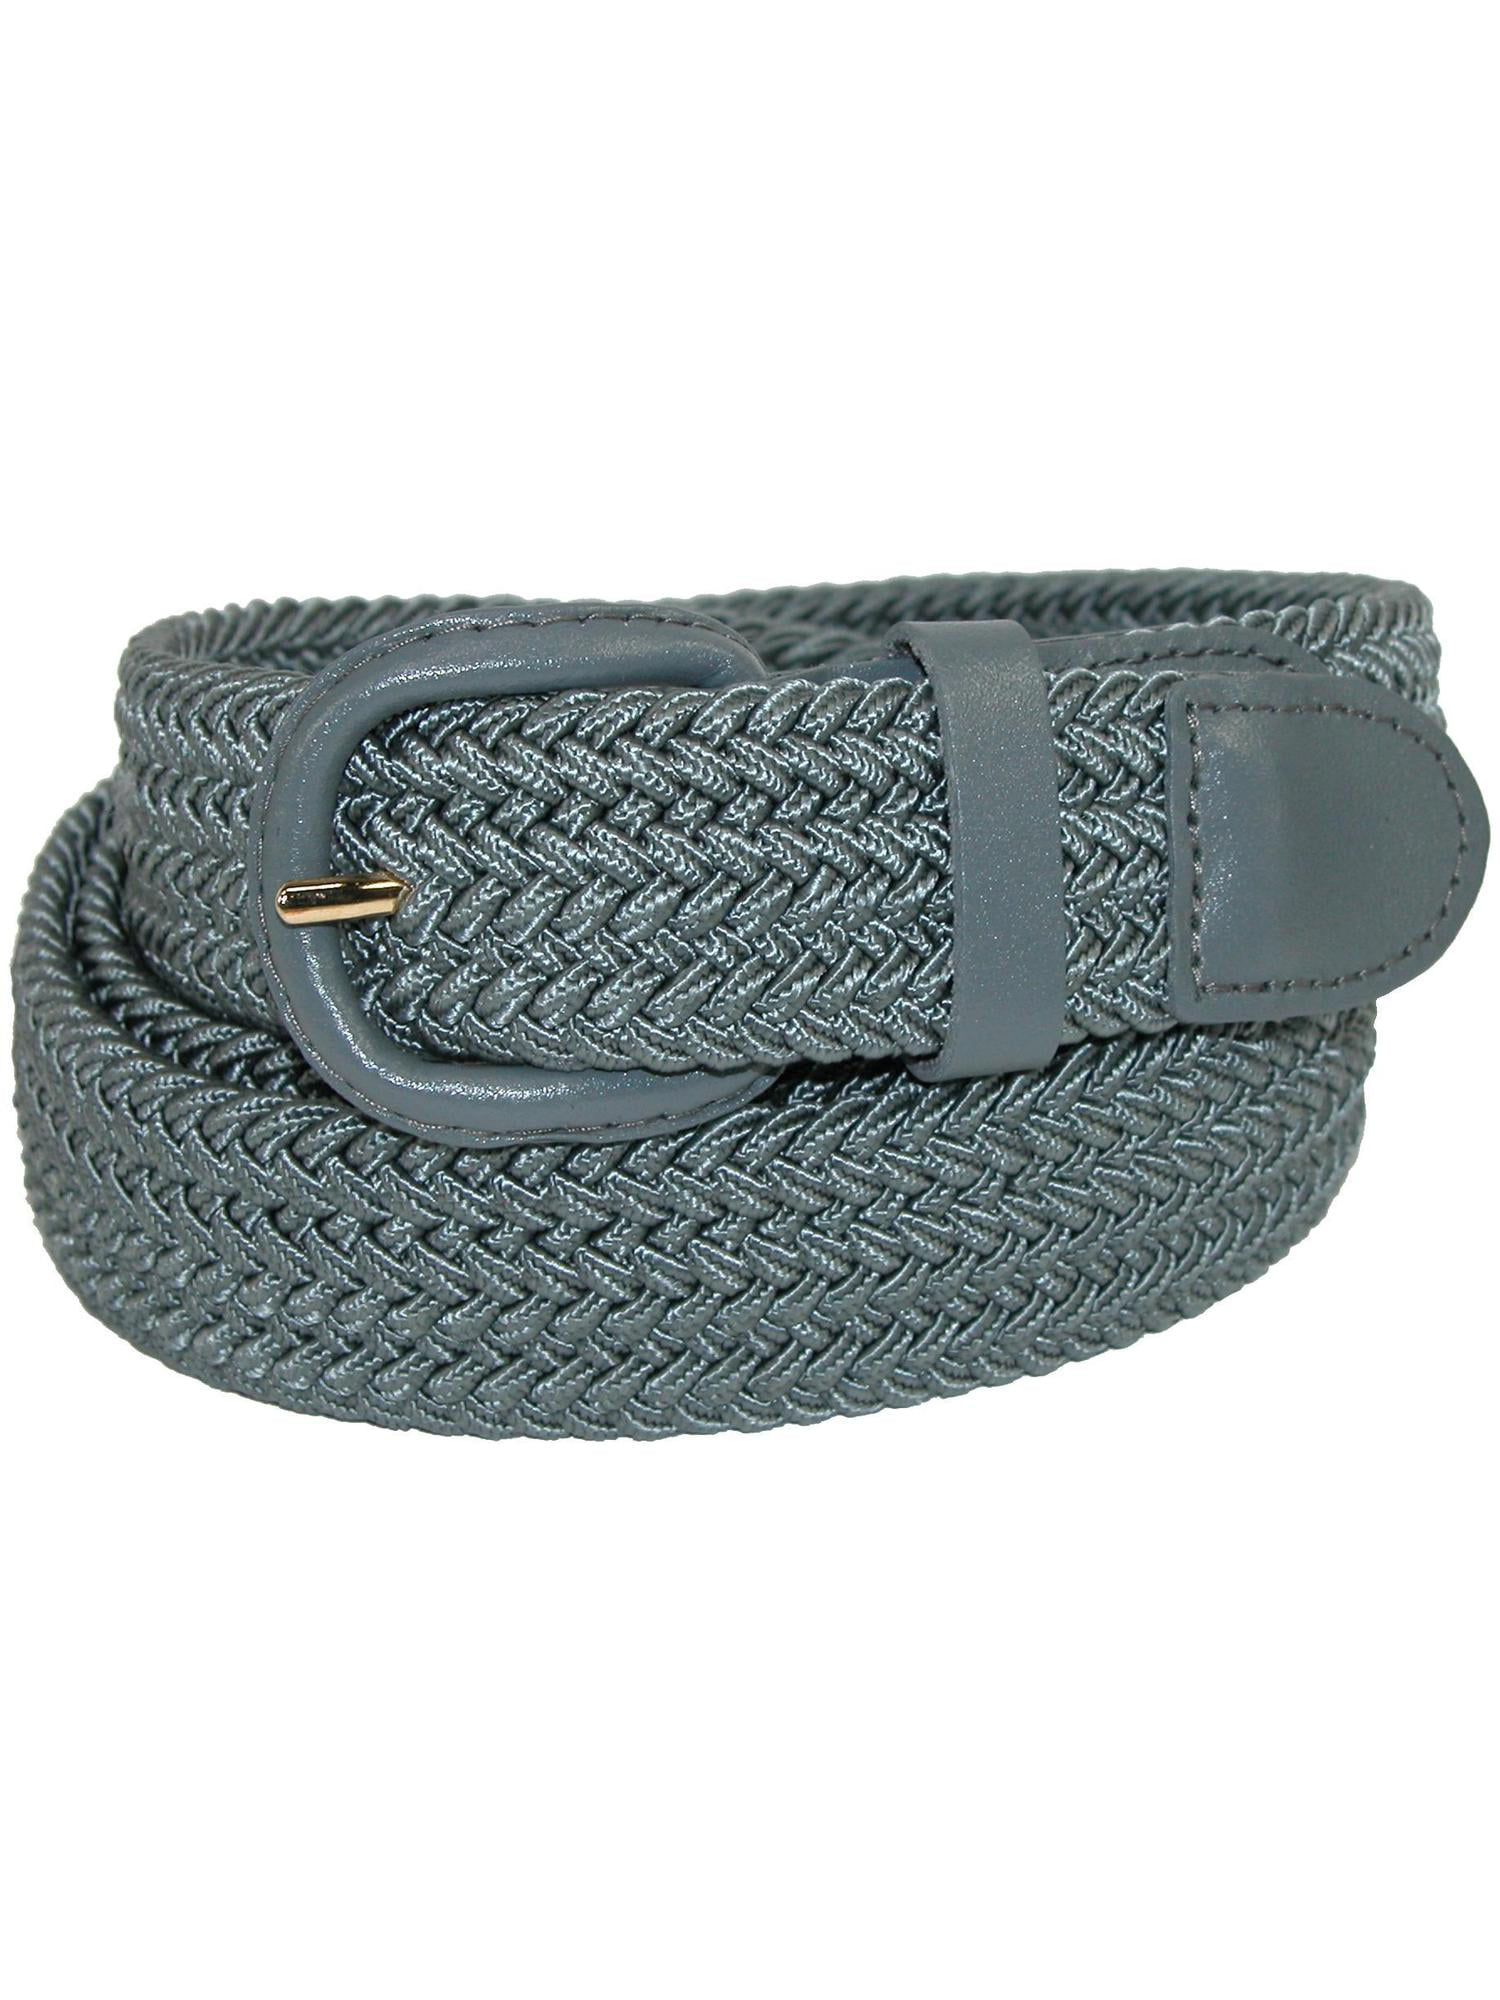 CTM - Men's Elastic Braided Belt with Covered Buckle (Big & Tall ...